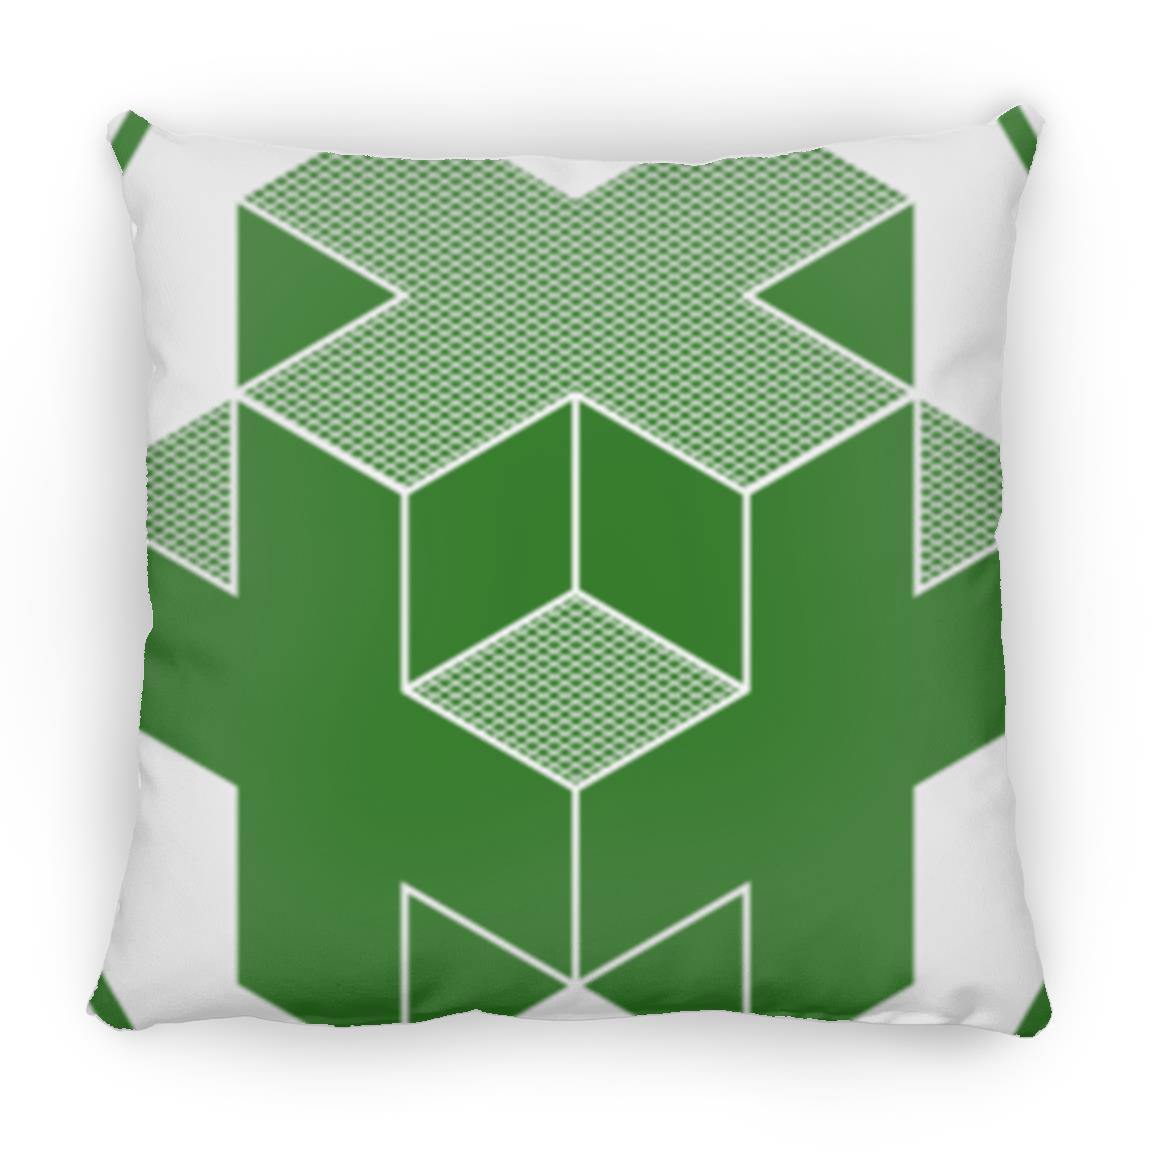 Crop Circle Pillow - Cley Hill - Shapes of Wisdom